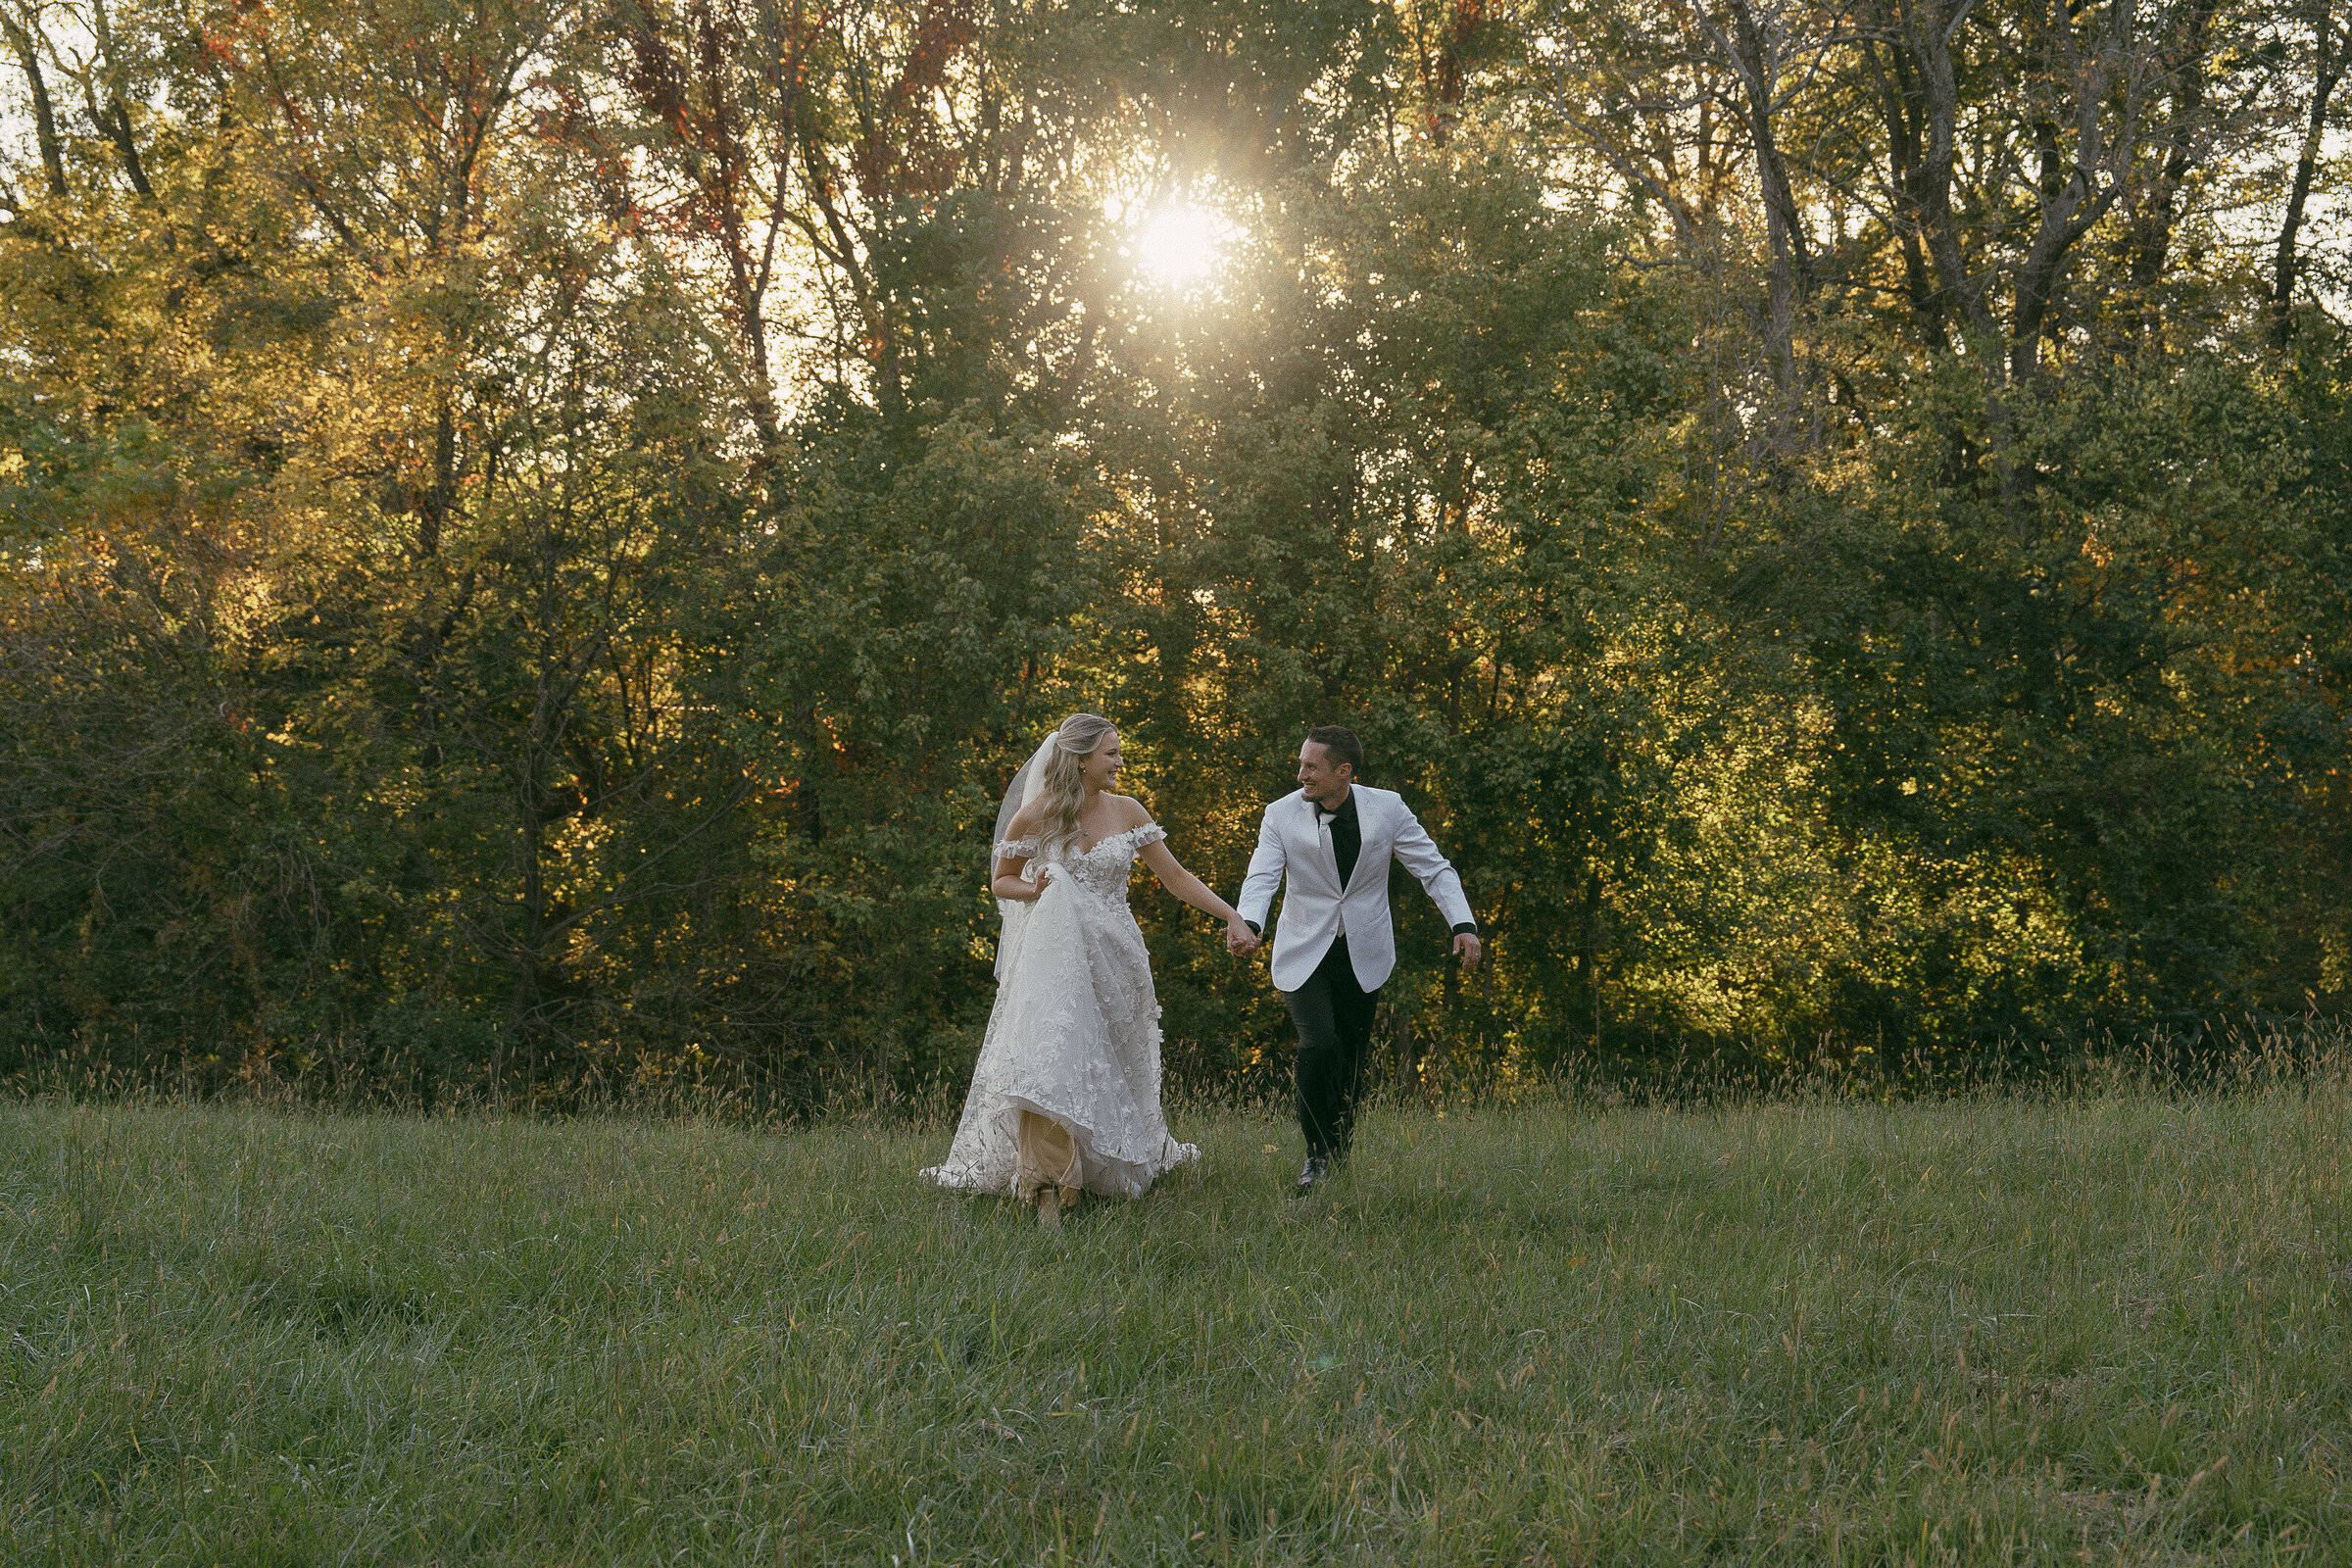 Bride and groom walking through a sunlit field.